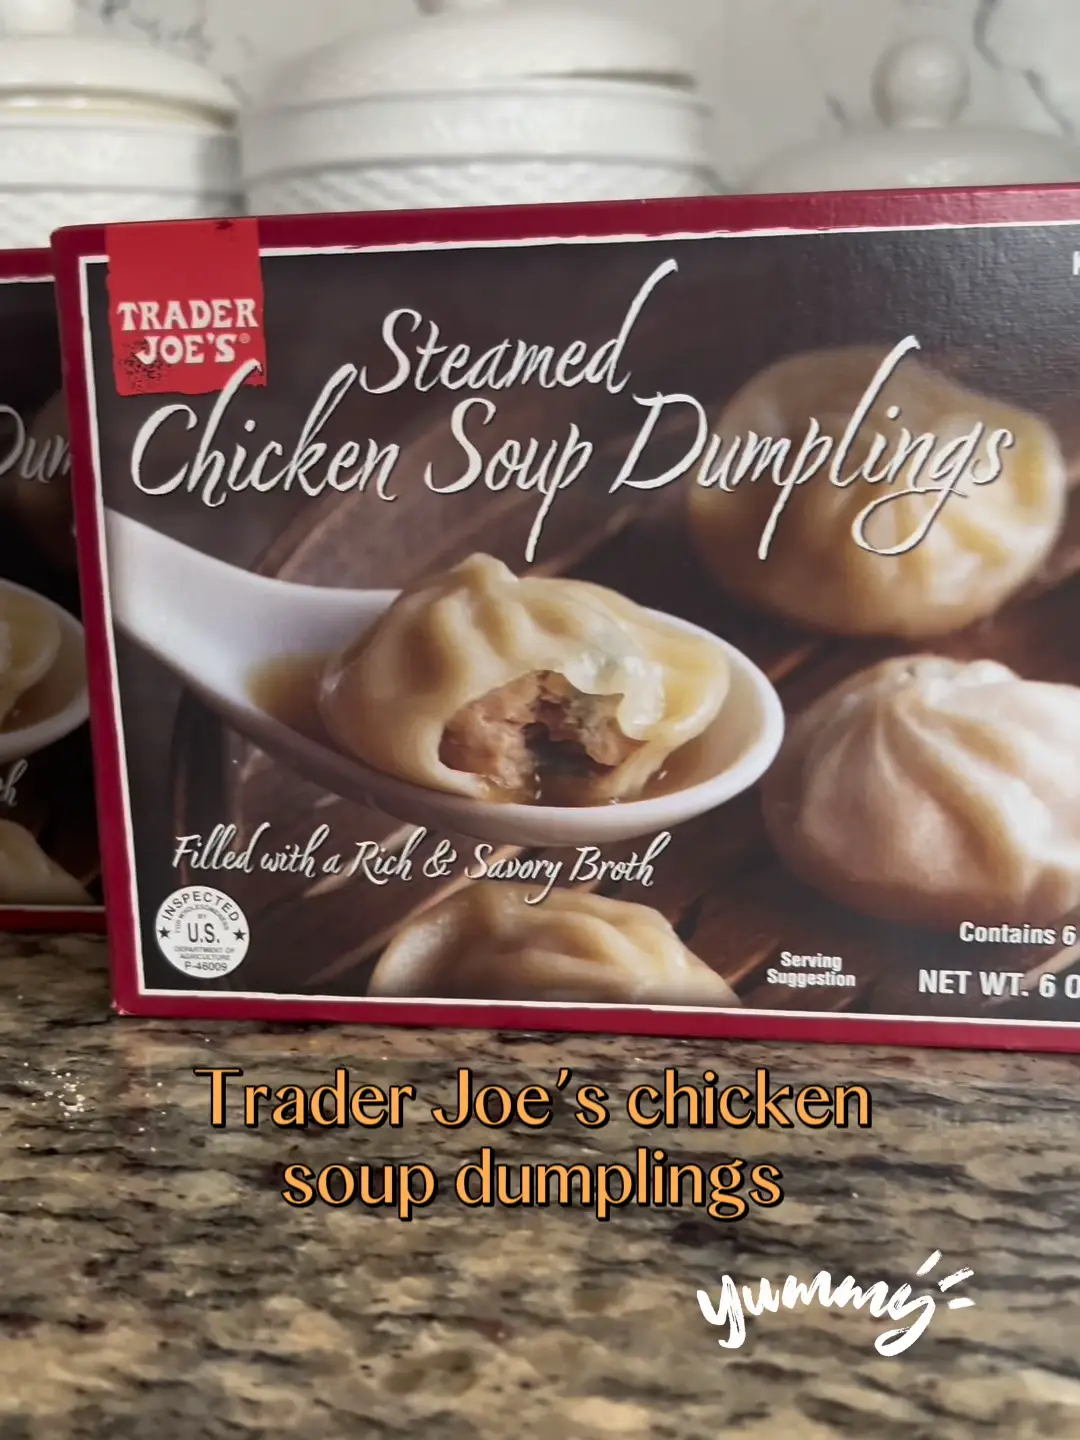 Trying Trader Joe's Viral soup dumplings 🥟, Gallery posted by Liannah B